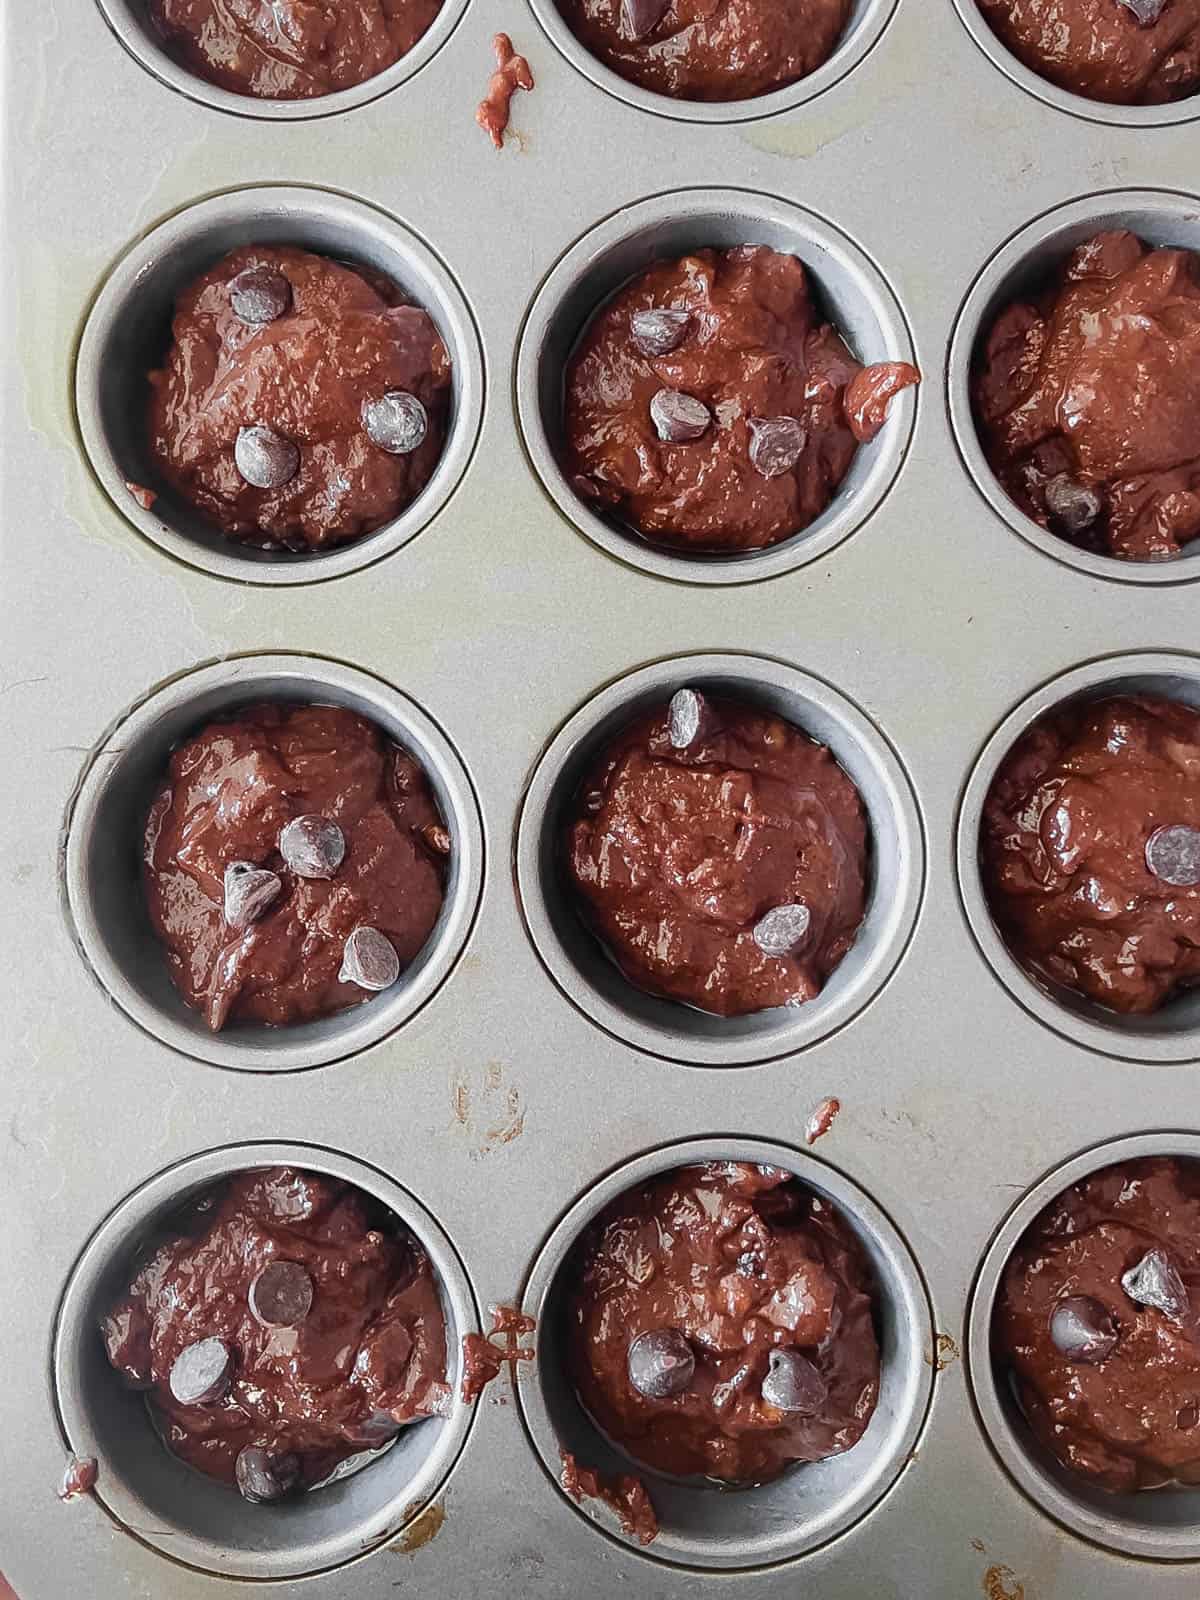 Paleo chocolate muffin batter in muffin tins before baking.